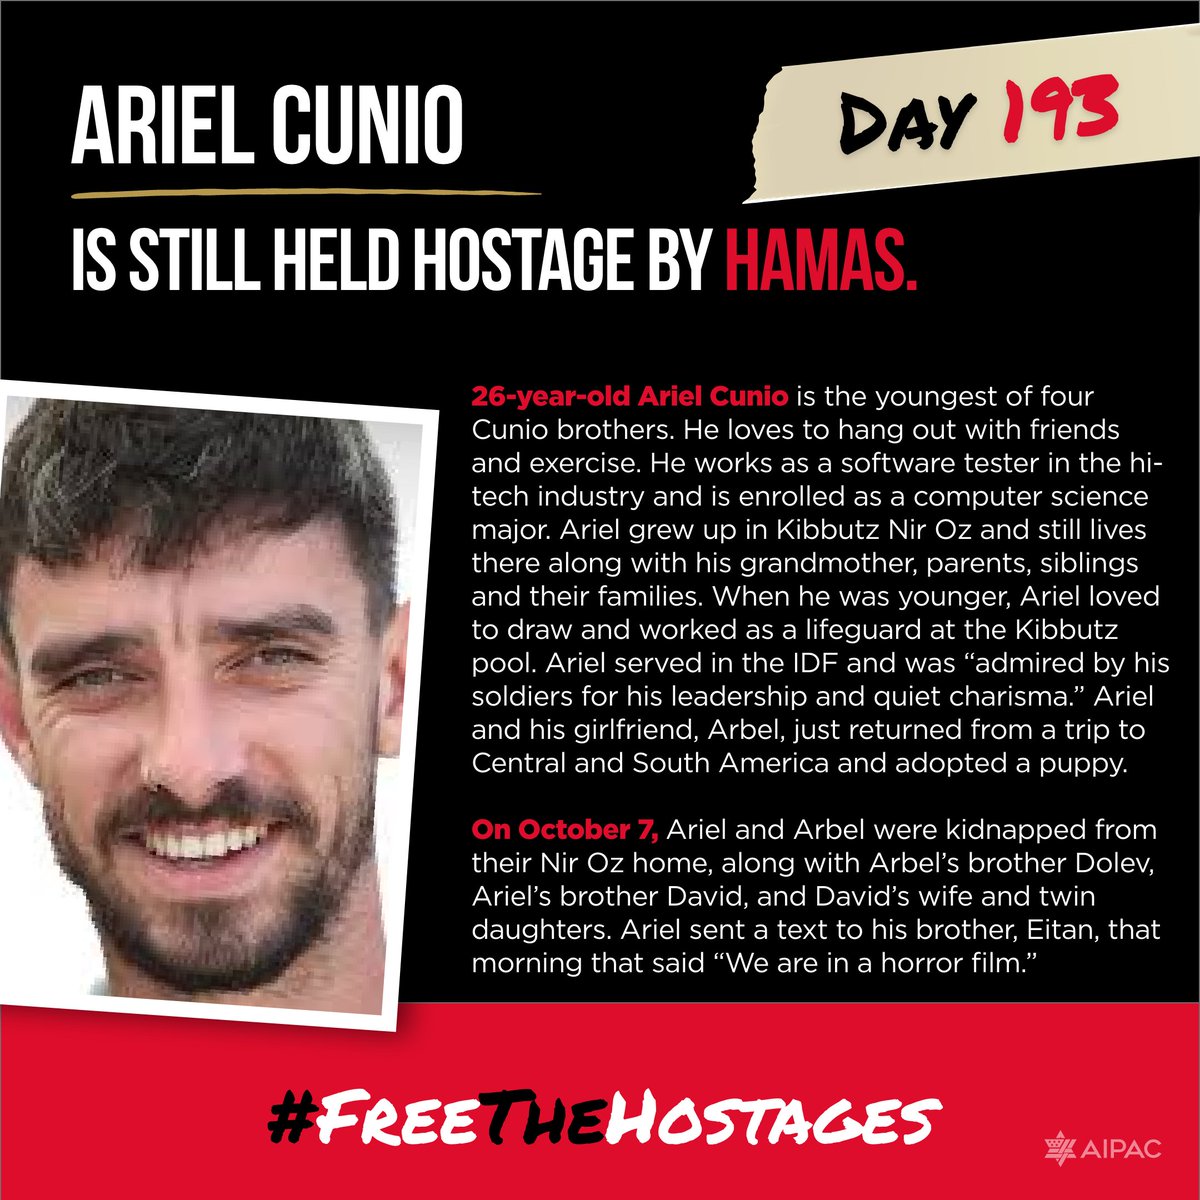 193 days. Ariel Cunio is still held hostage by Hamas. Share his story. #FreeTheHostages

@bringhomenow